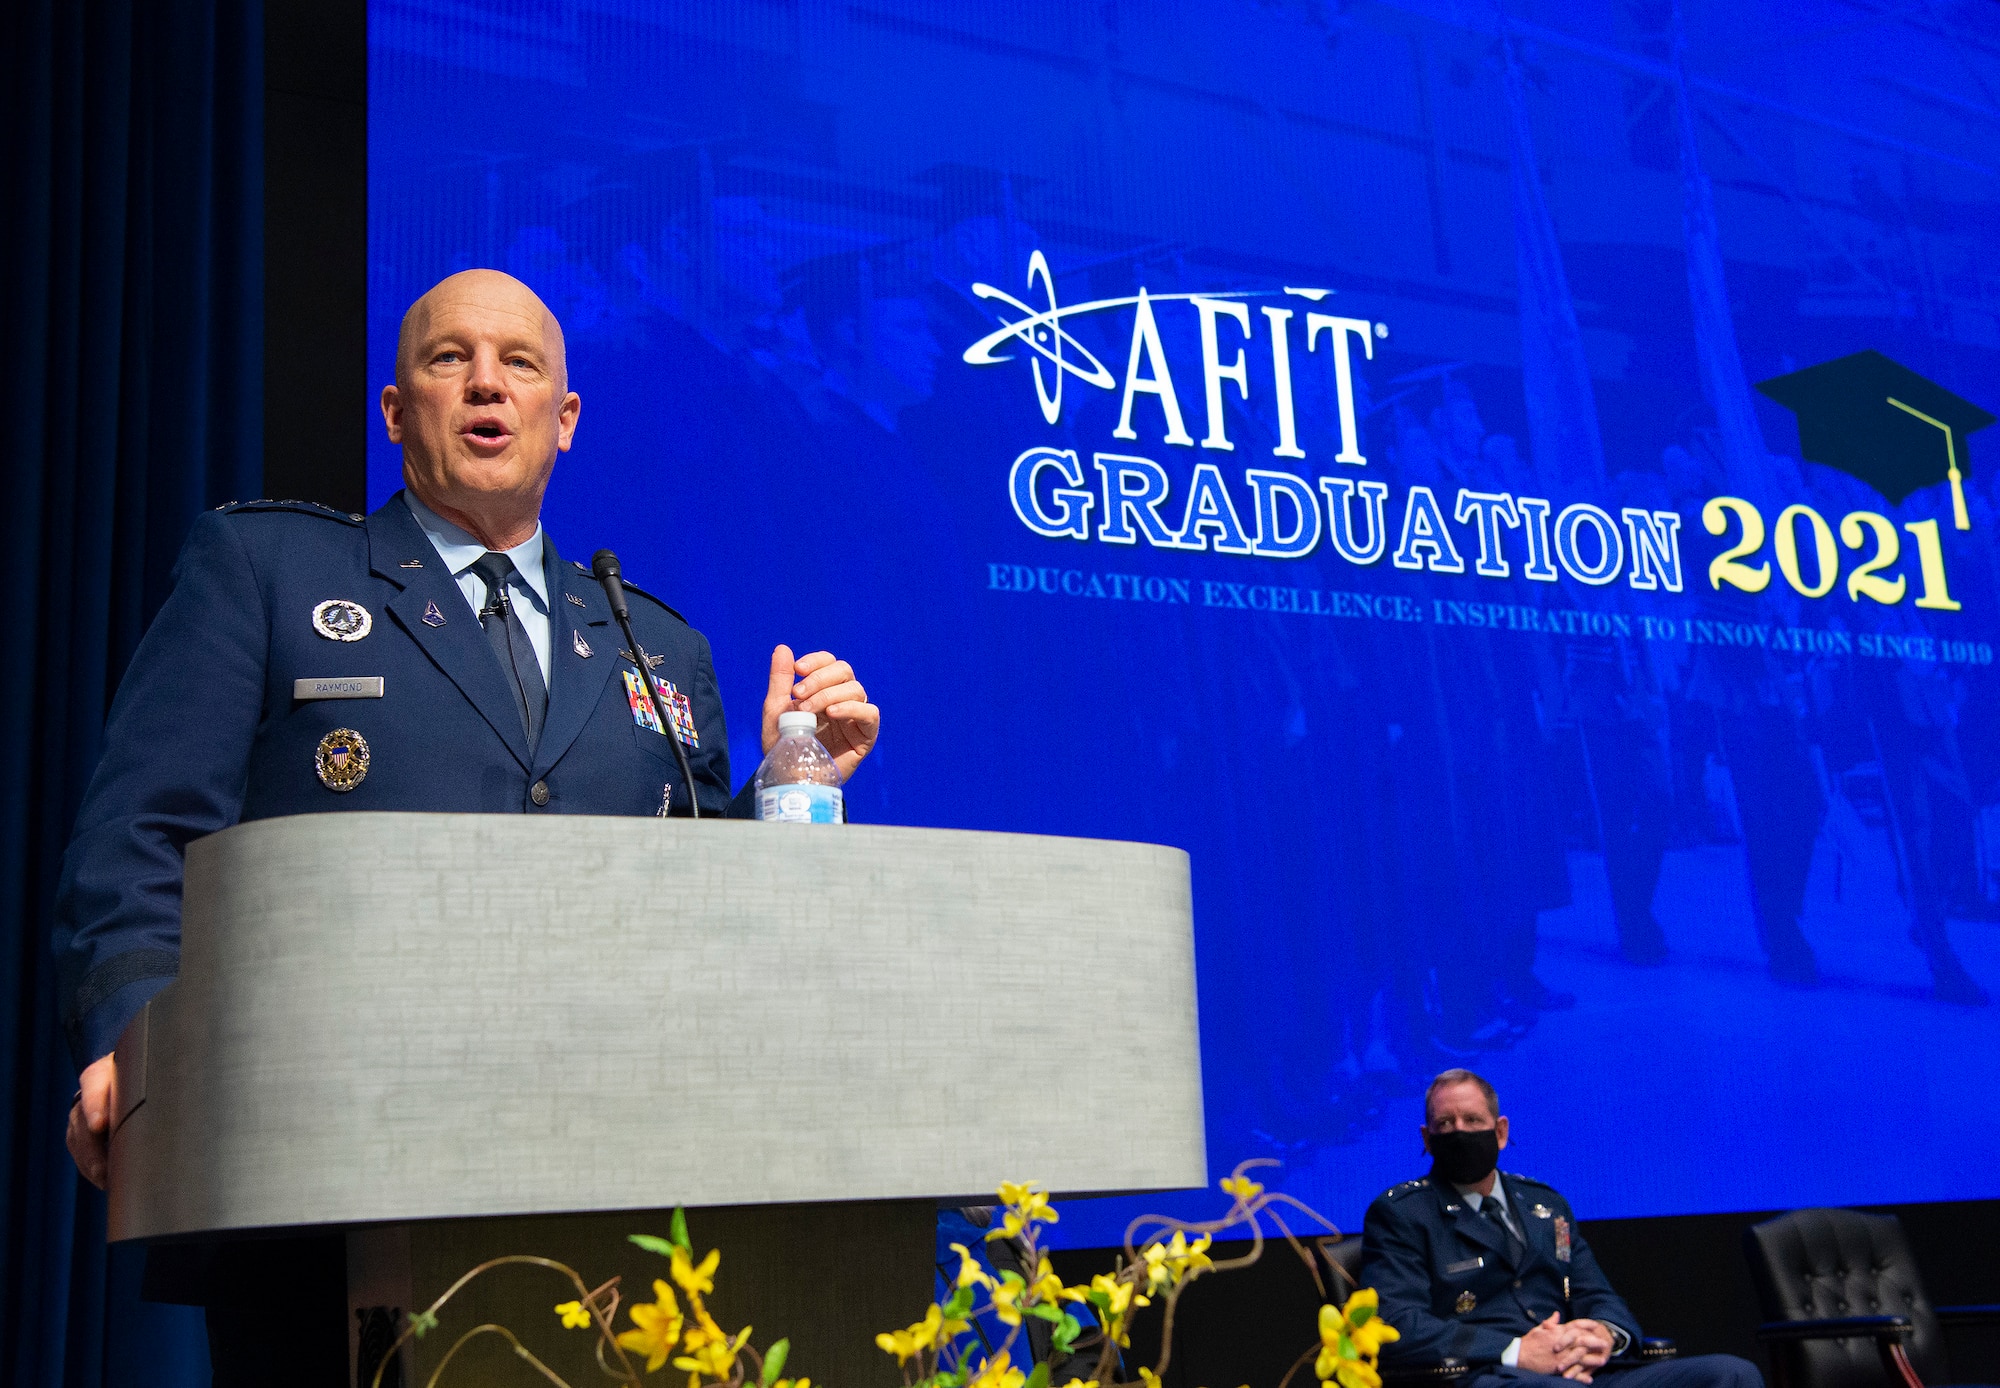 United States Space Force Gen. John W. Raymond, Chief of Space Operations, gives the graduation address at the Air Force Institute of Technology graduation ceremony on Wright-Patterson Air Force Base, Ohio. March 25, 2021. The graduating class of more than 200 students included 33 Guardians earning their advanced degrees. (U.S. Air Force photo by R.J. Oriez)